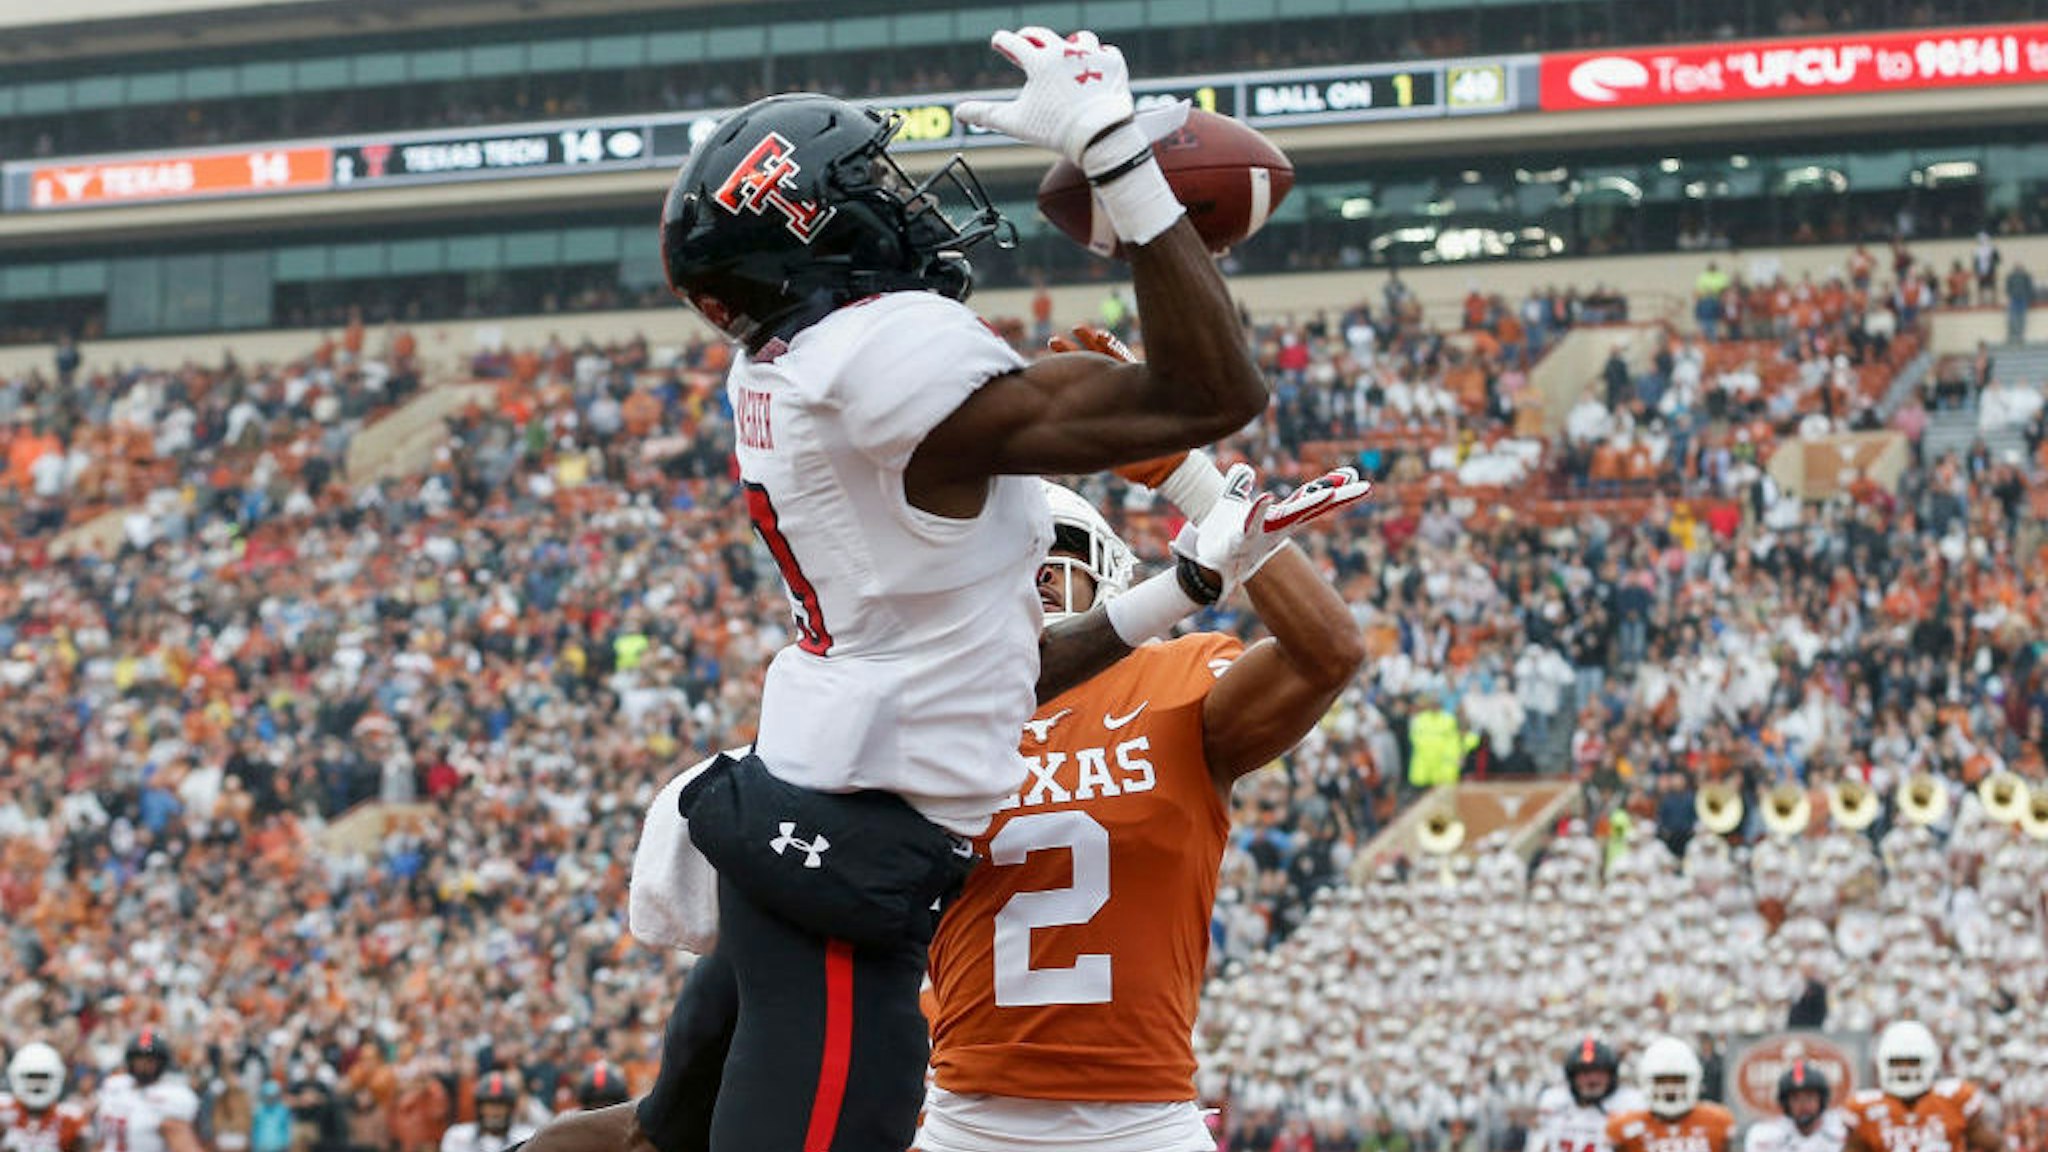 AUSTIN, TX - NOVEMBER 29: Kenyatta Watson II #2 of the Texas Longhorns breaks up a pass in the end zone intended for T.J. Vasher #9 of the Texas Tech Red Raiders in the second quarter at Darrell K Royal-Texas Memorial Stadium on November 29, 2019 in Austin, Texas. (Photo by Tim Warner/Getty Images)